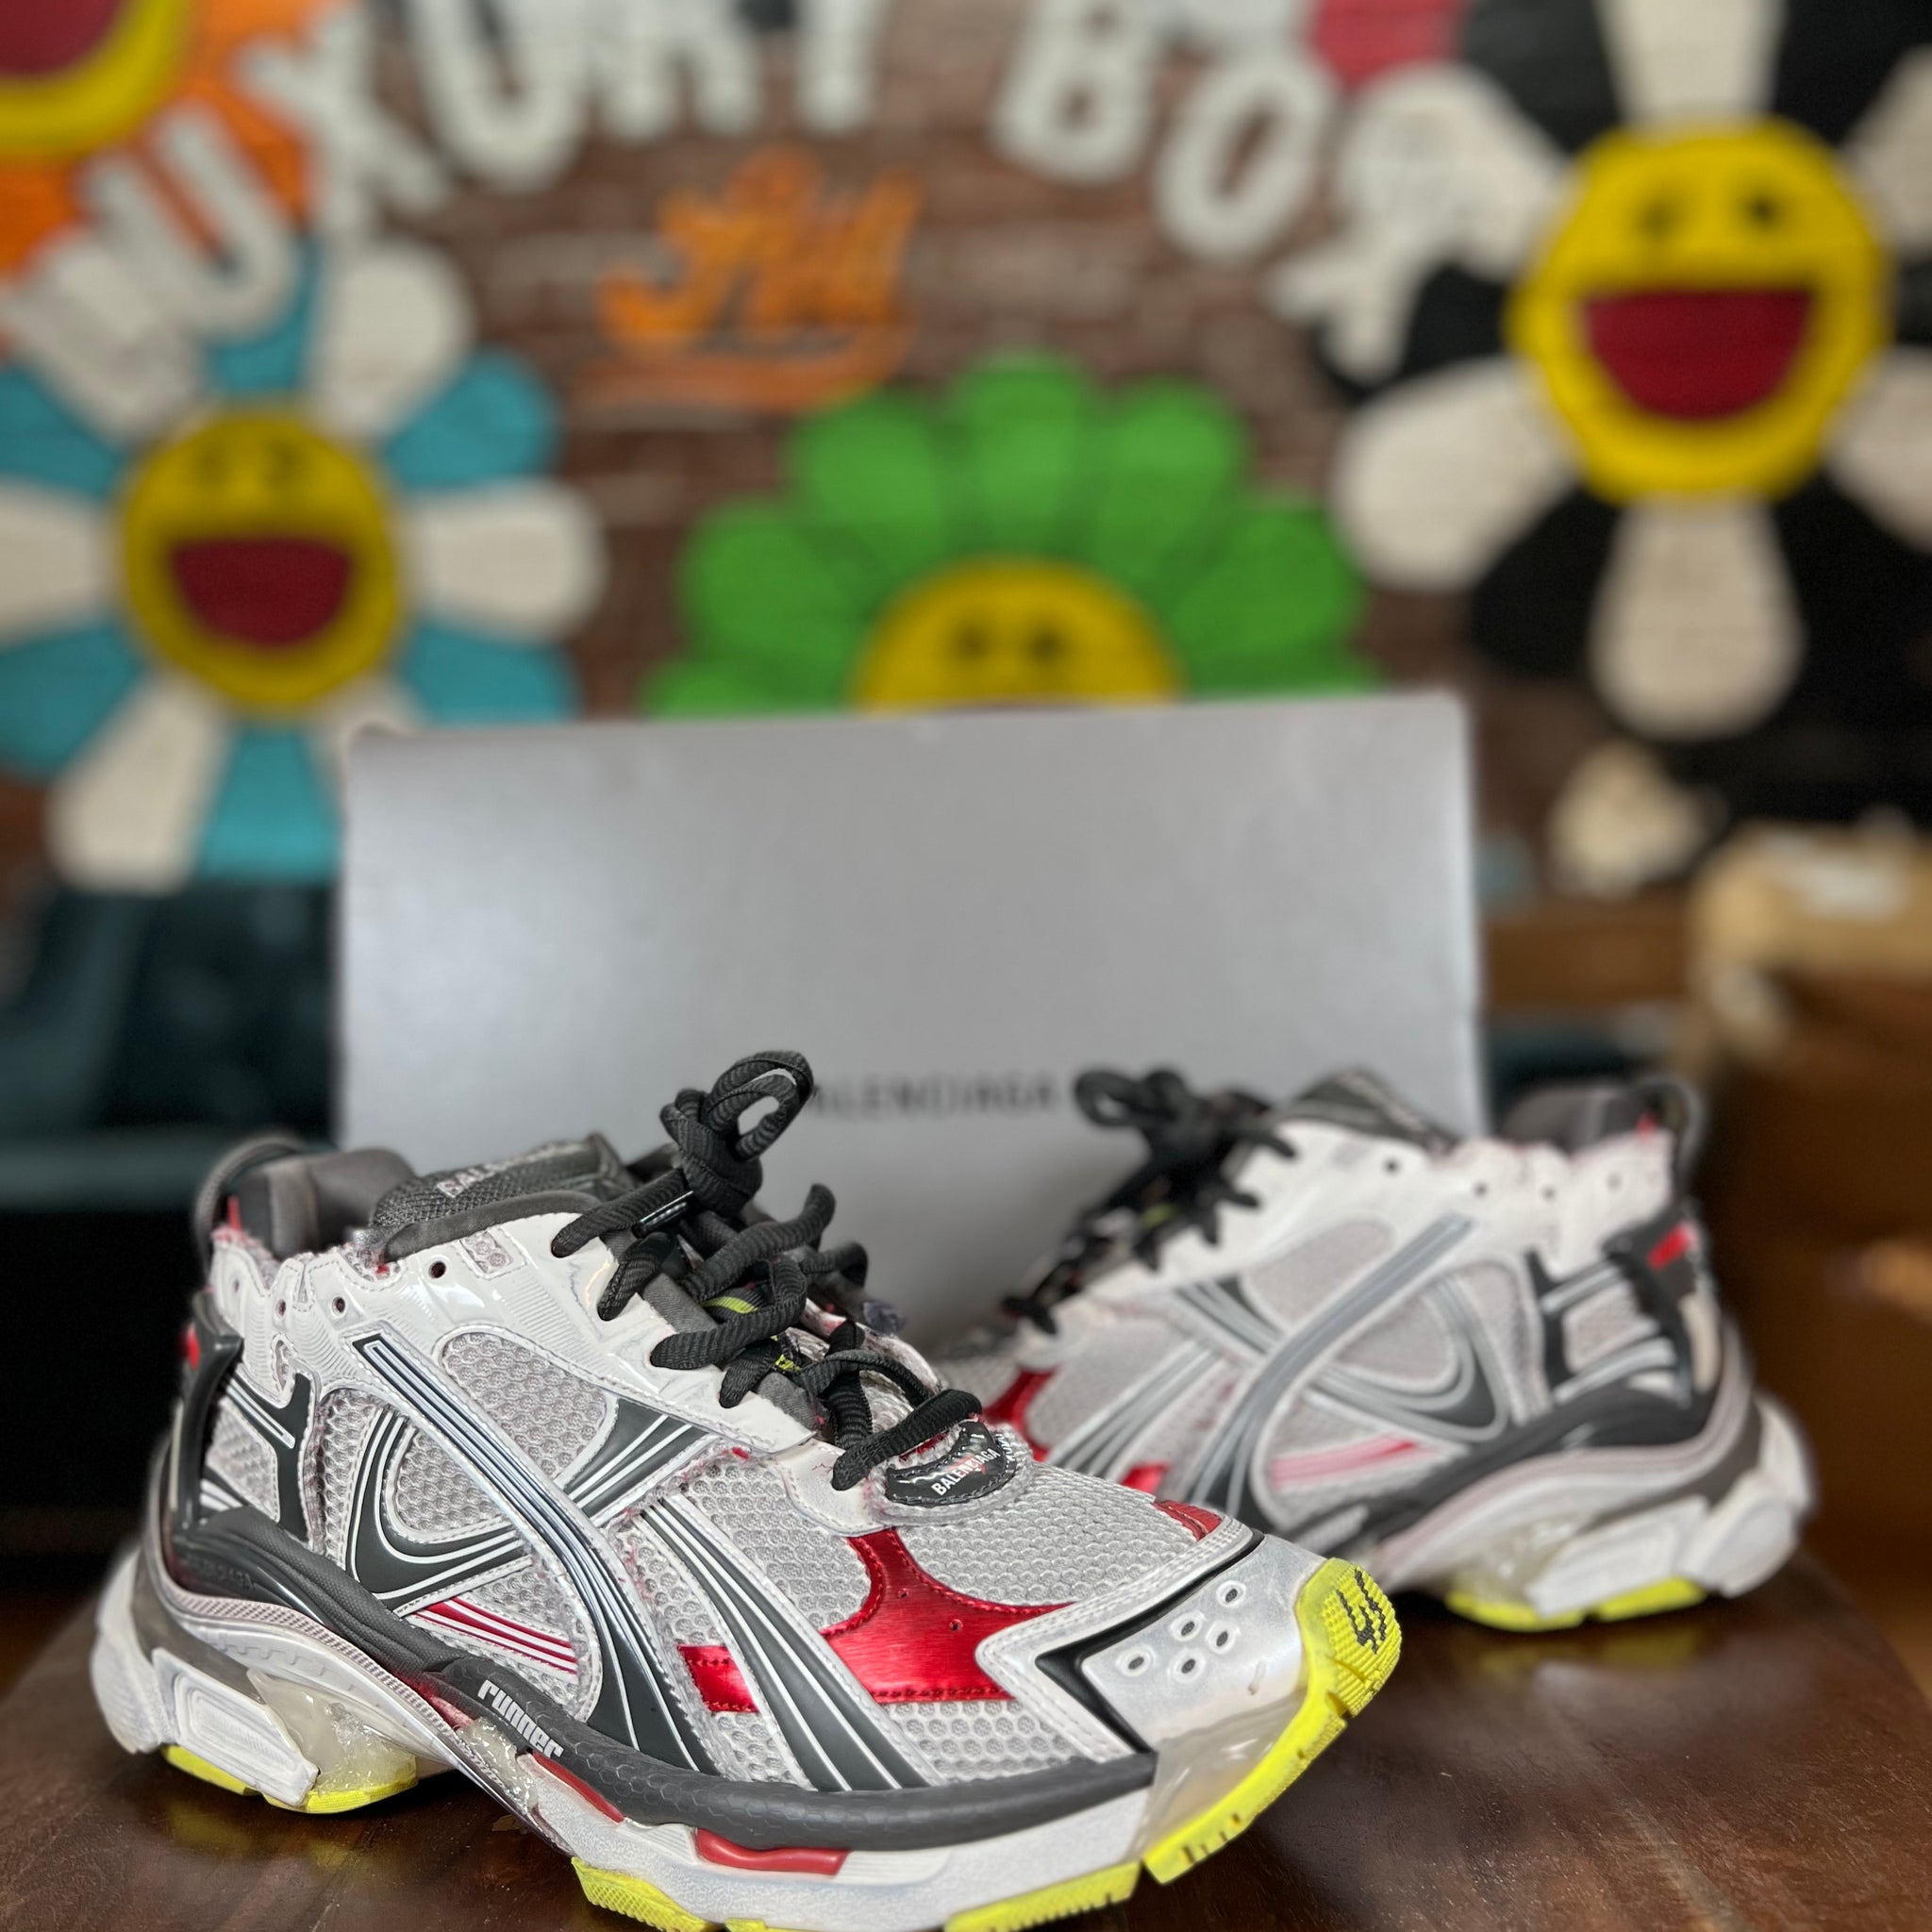 Balenciaga Track Runner "Grey/Red/Neon" (Pre-Owned W Box)